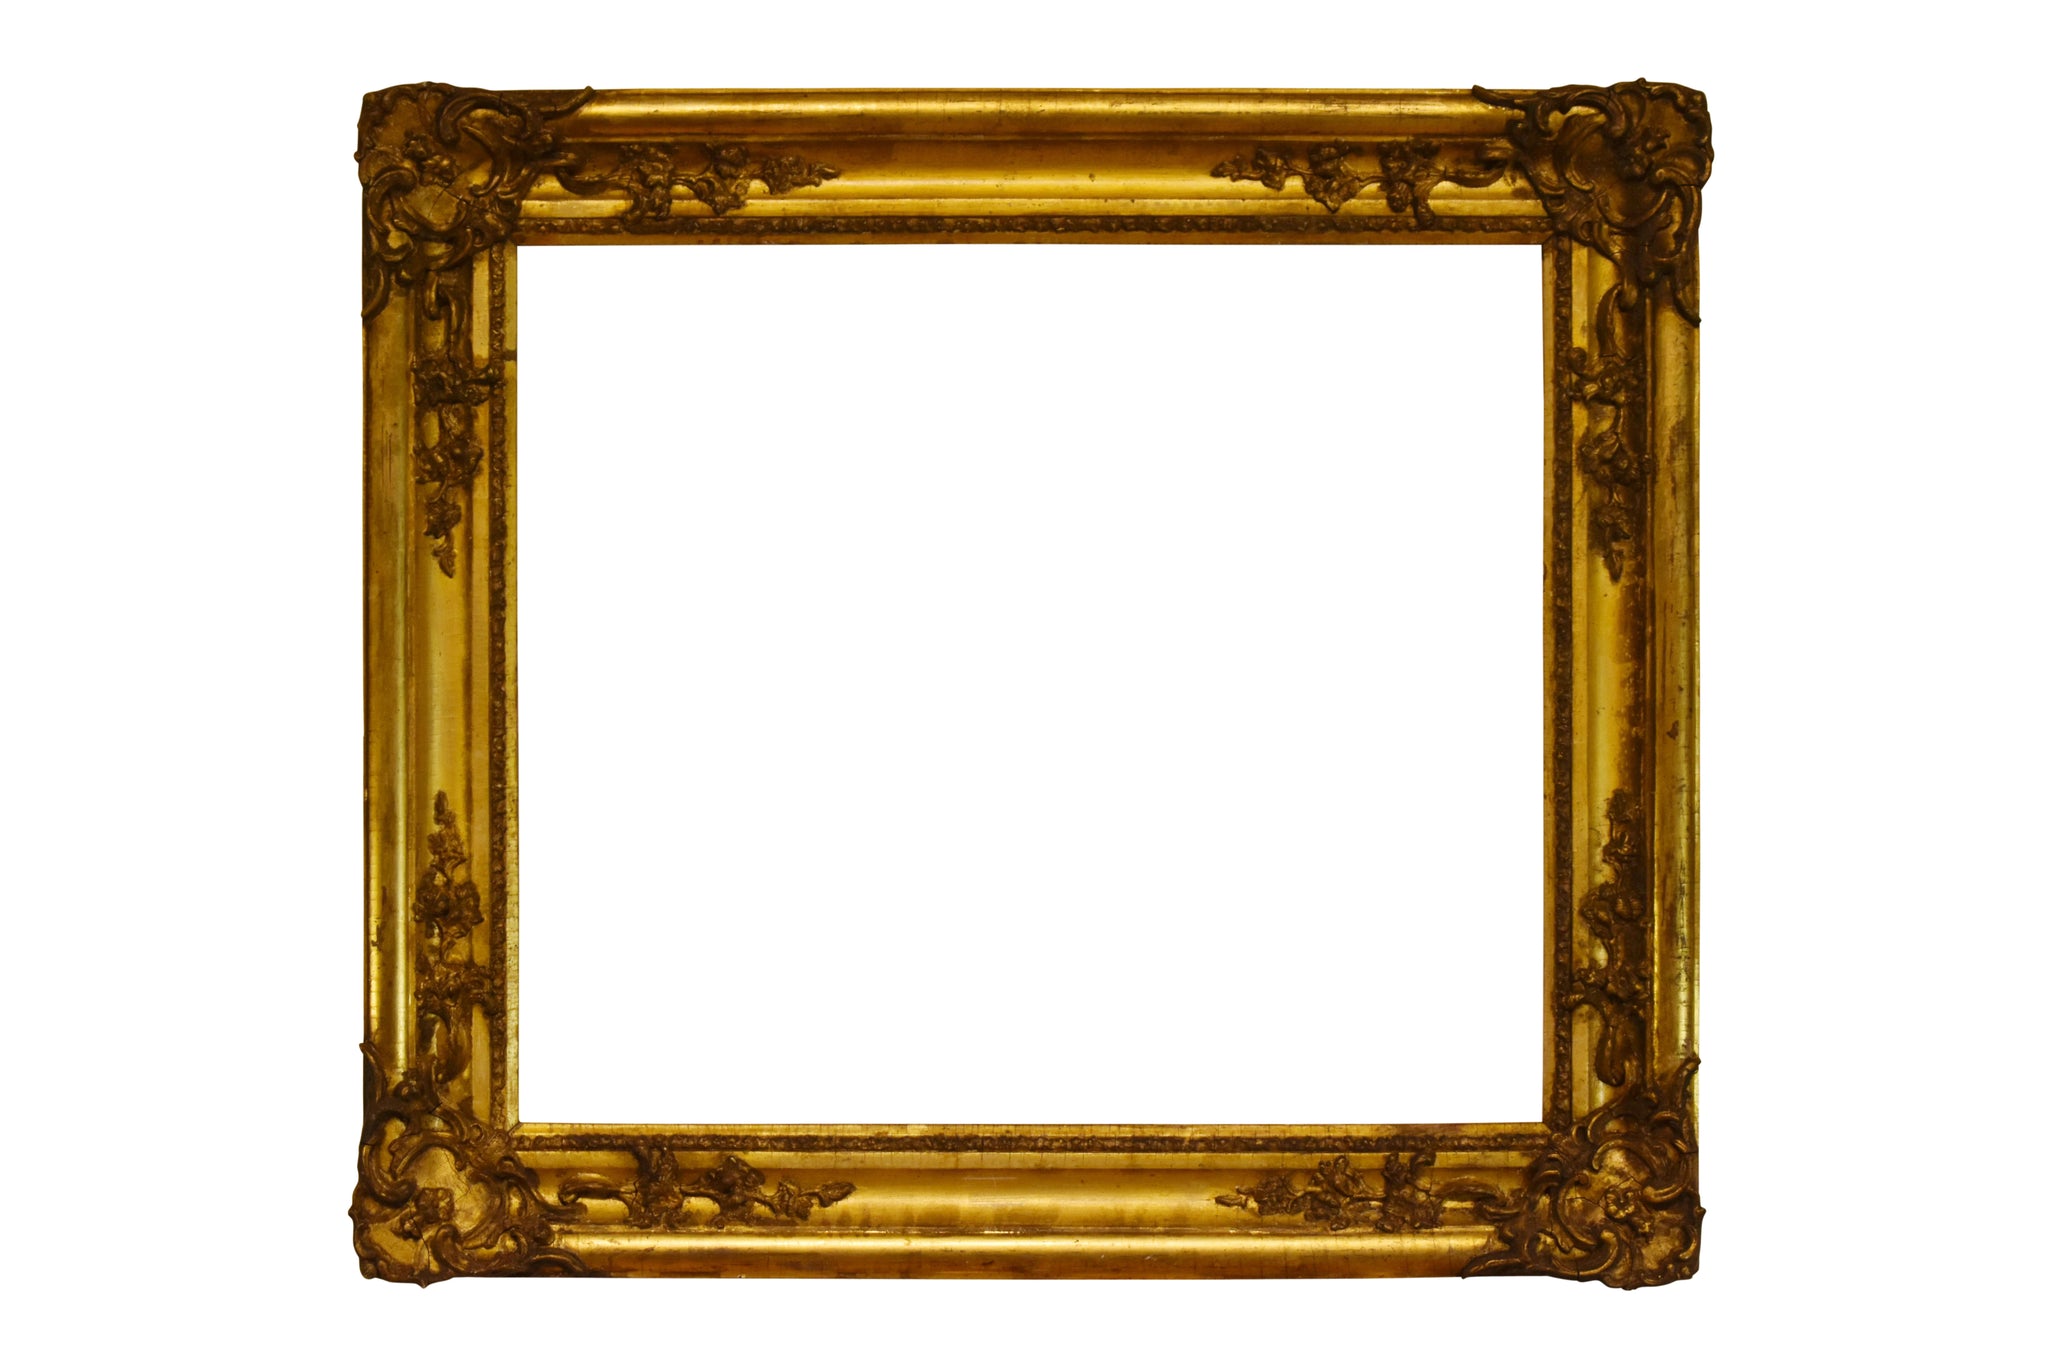 23x27 Inch Antique American Victorian Gold Picture Frame for canvas art circa 1840 (19th Century).